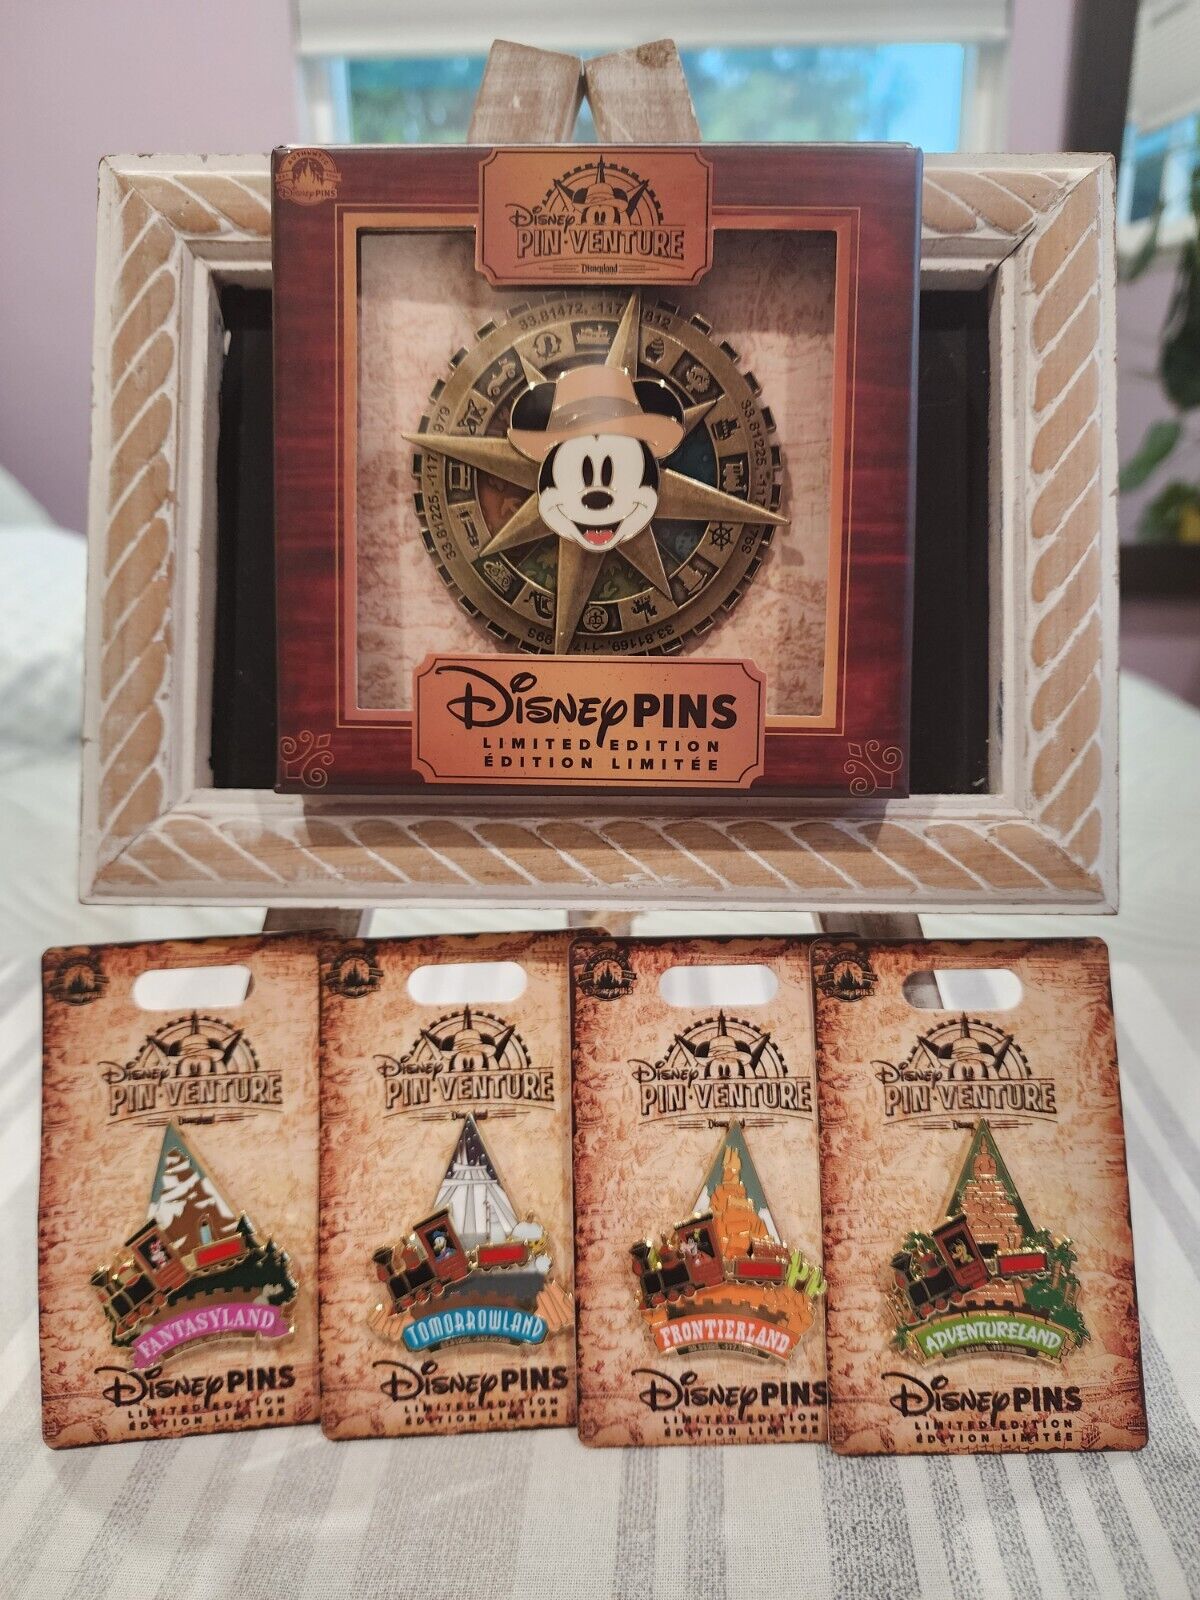 2024 Disney Parks Pin-Venture Super Jumbo MM Compass LE 500 With All 4 Lands